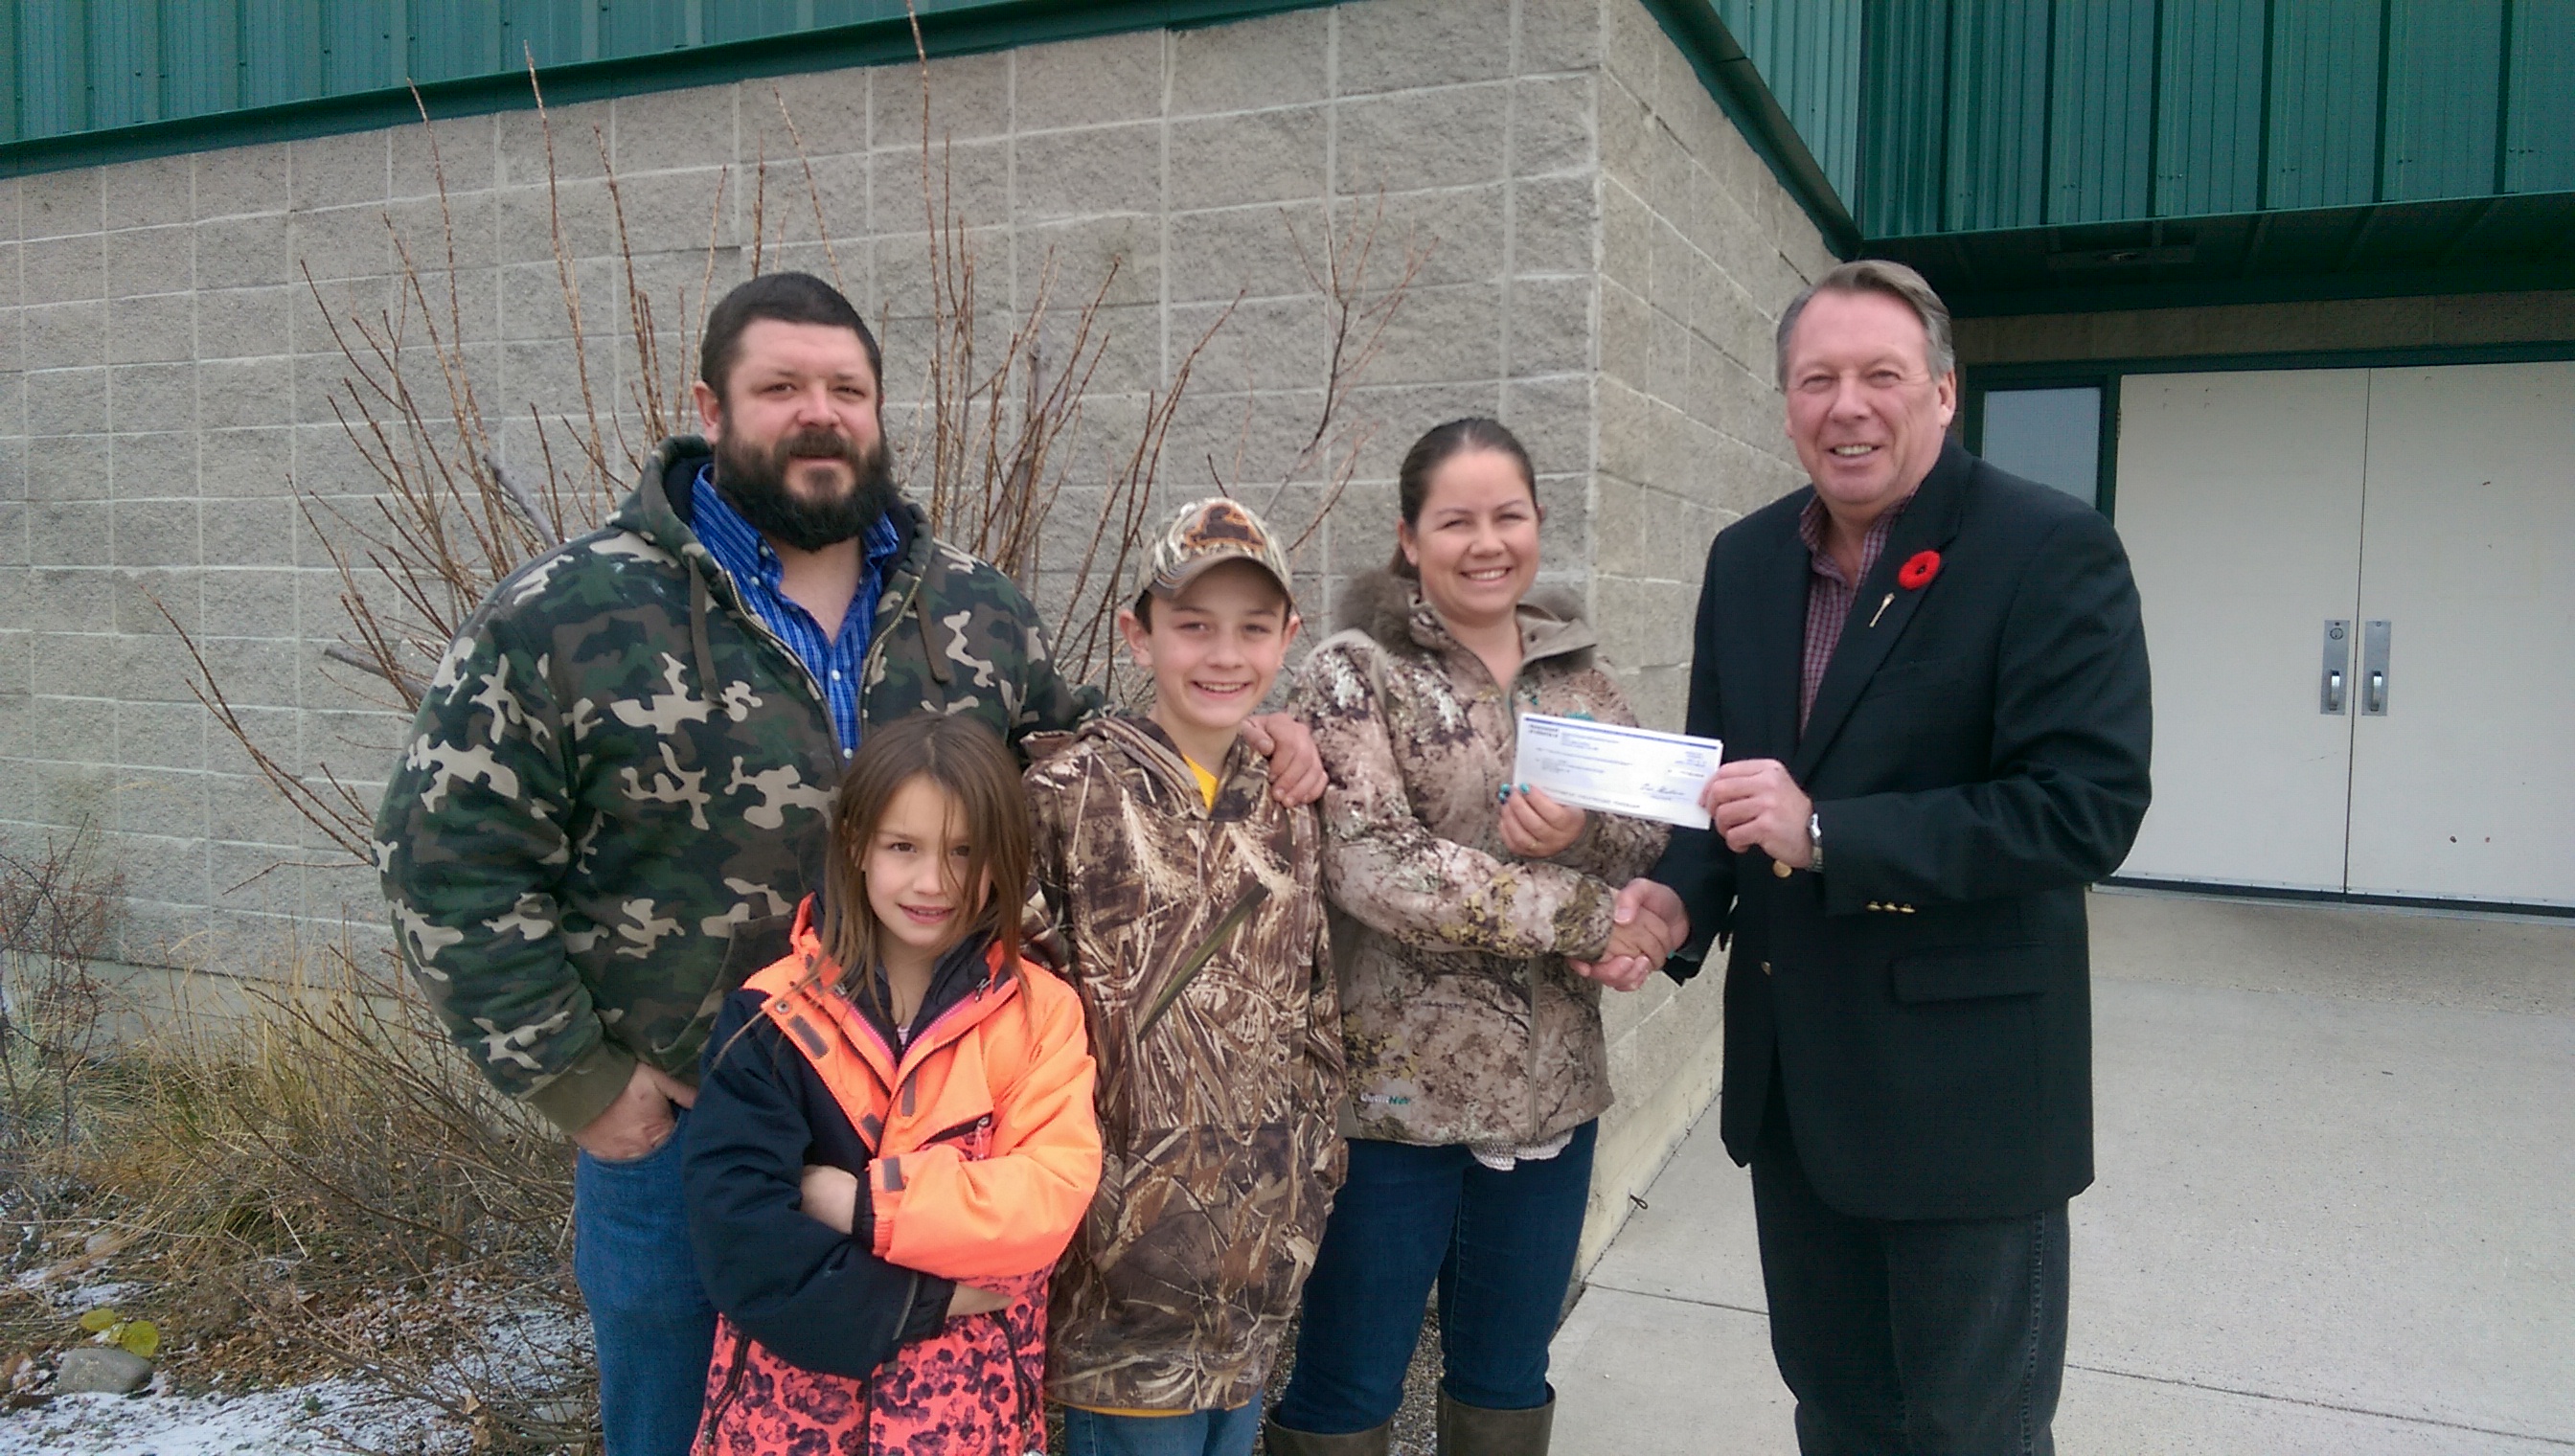 Pat Stier, MLA, Delivers Cheques to Three Worthy Organizations